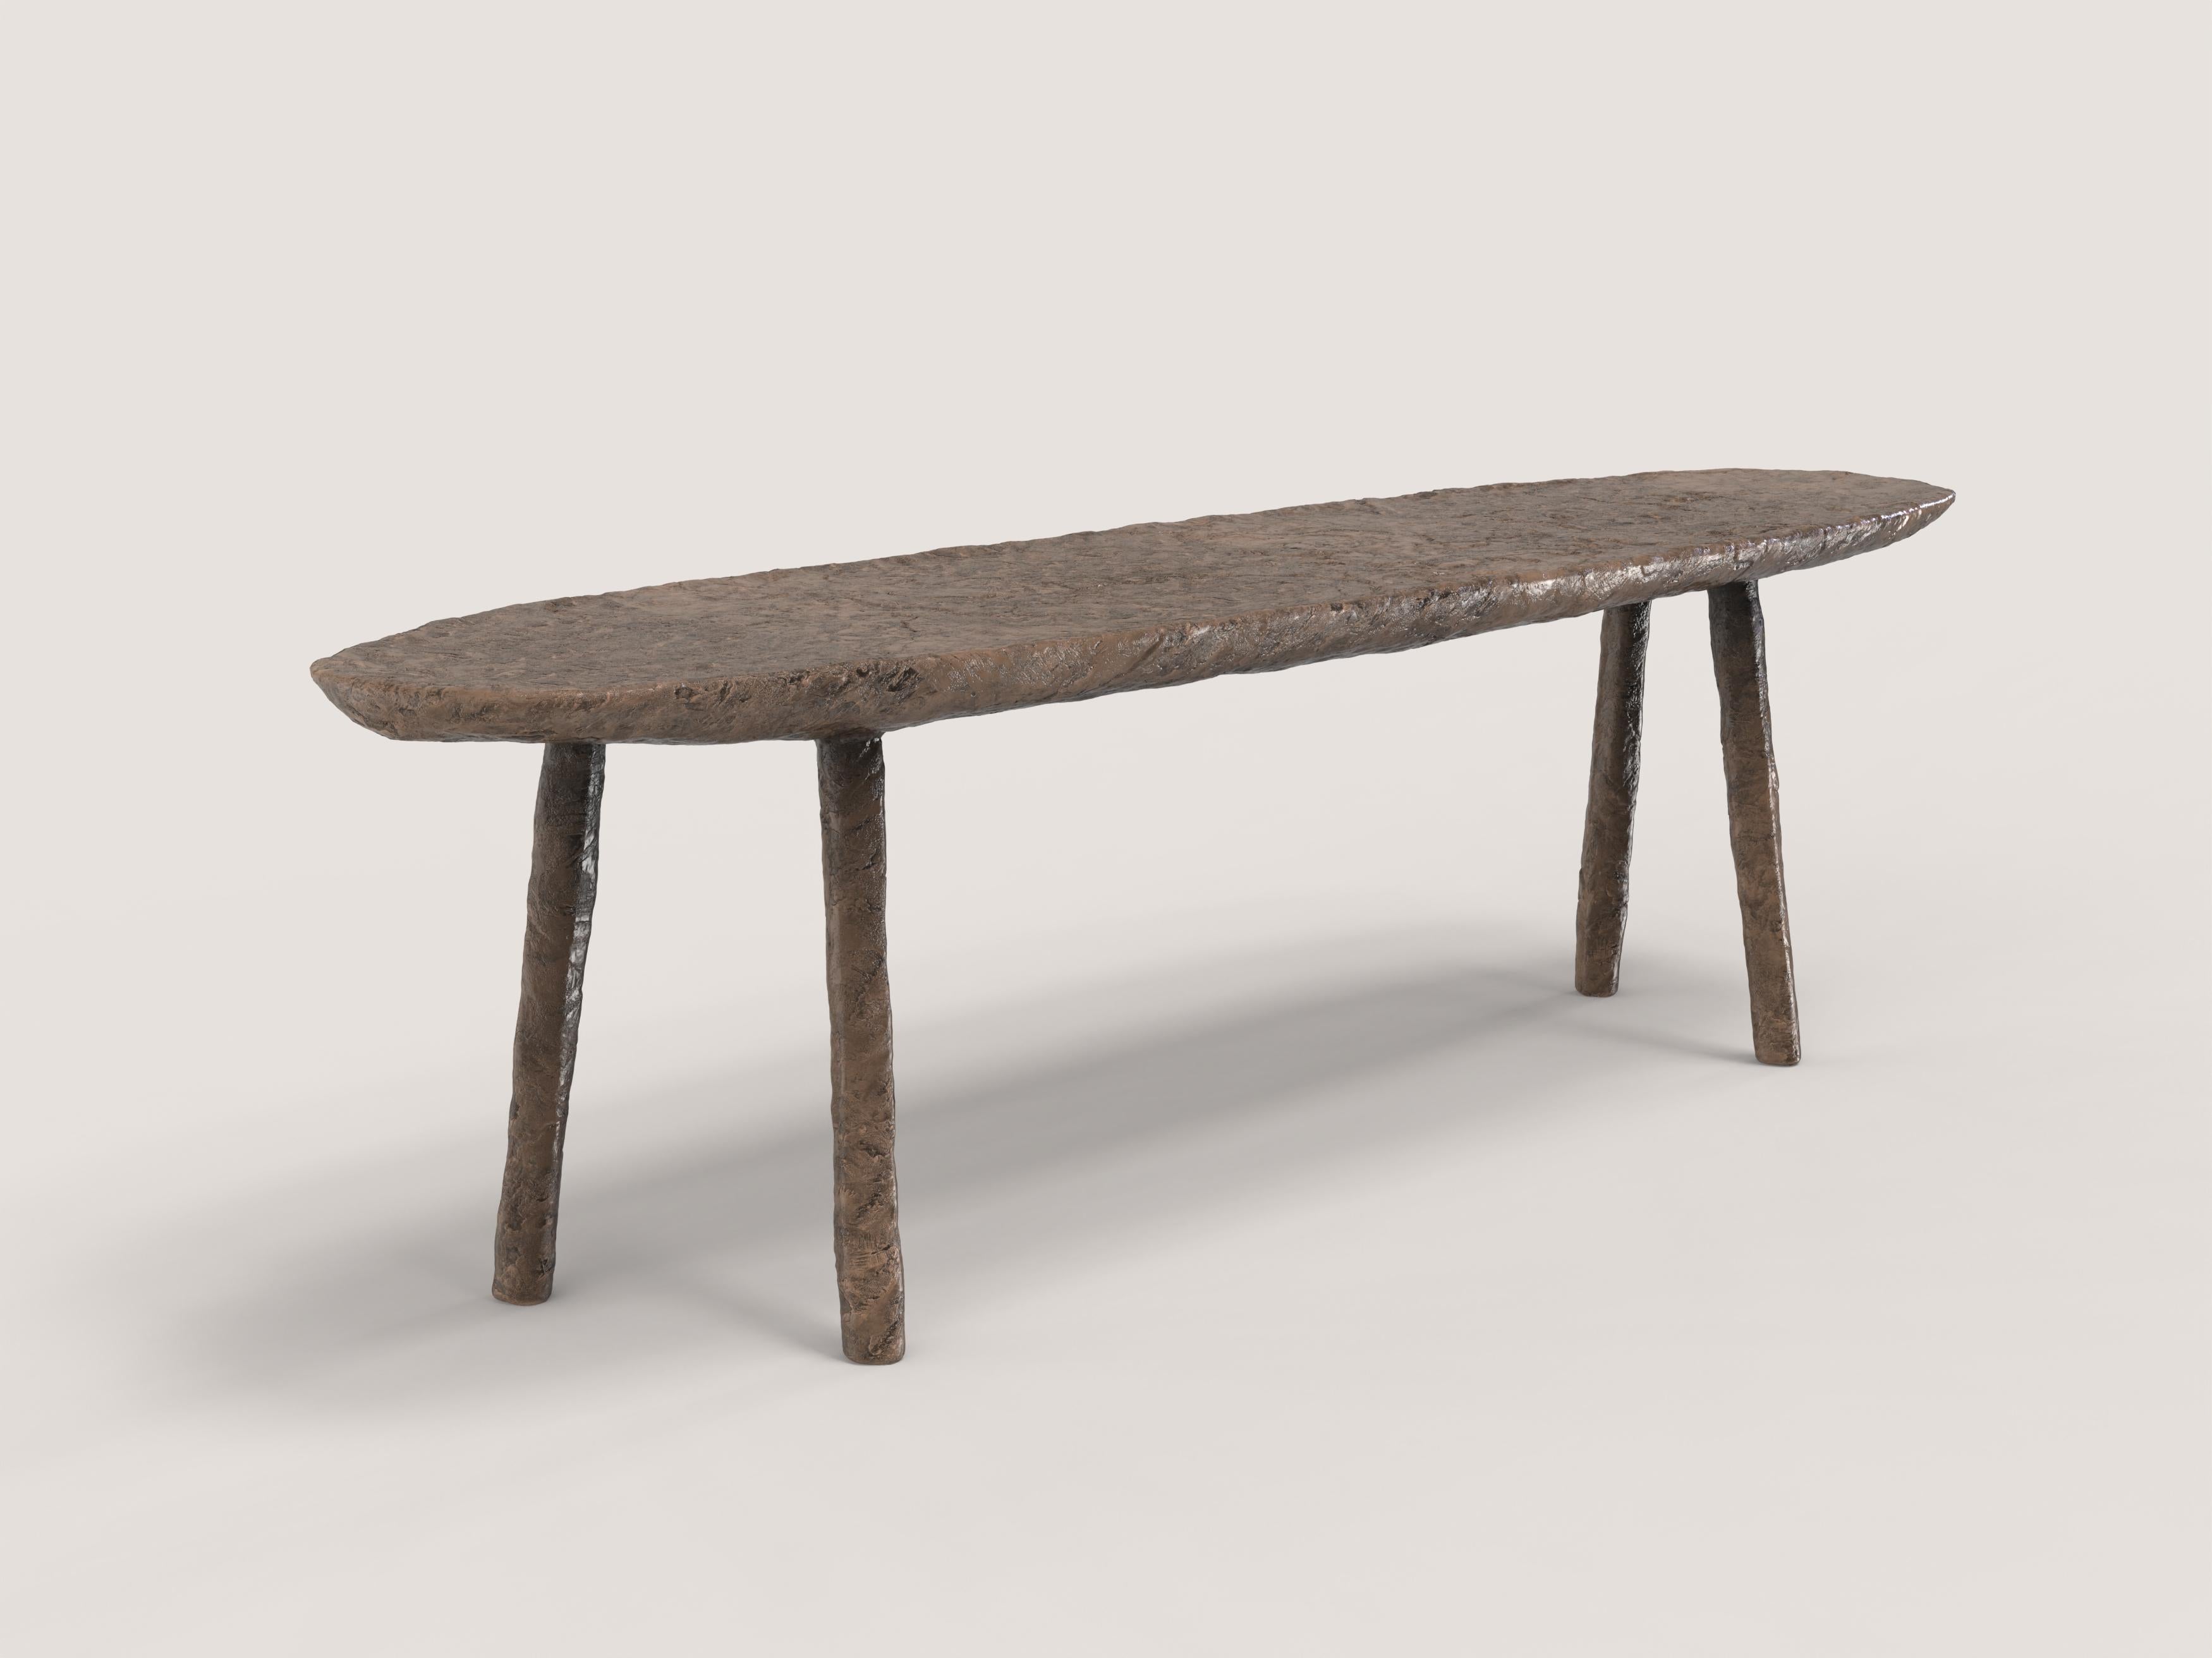 Comma V2 Bench by Edizione Limitata
Limited edition of 150 pieces. Signed and numbered.
Dimensions: D 34 x W 134 x H 39 cm.
Materials: Cast bronze.

Comma is a 21st century collection of seatings made by Italian artisans in bronze with a green